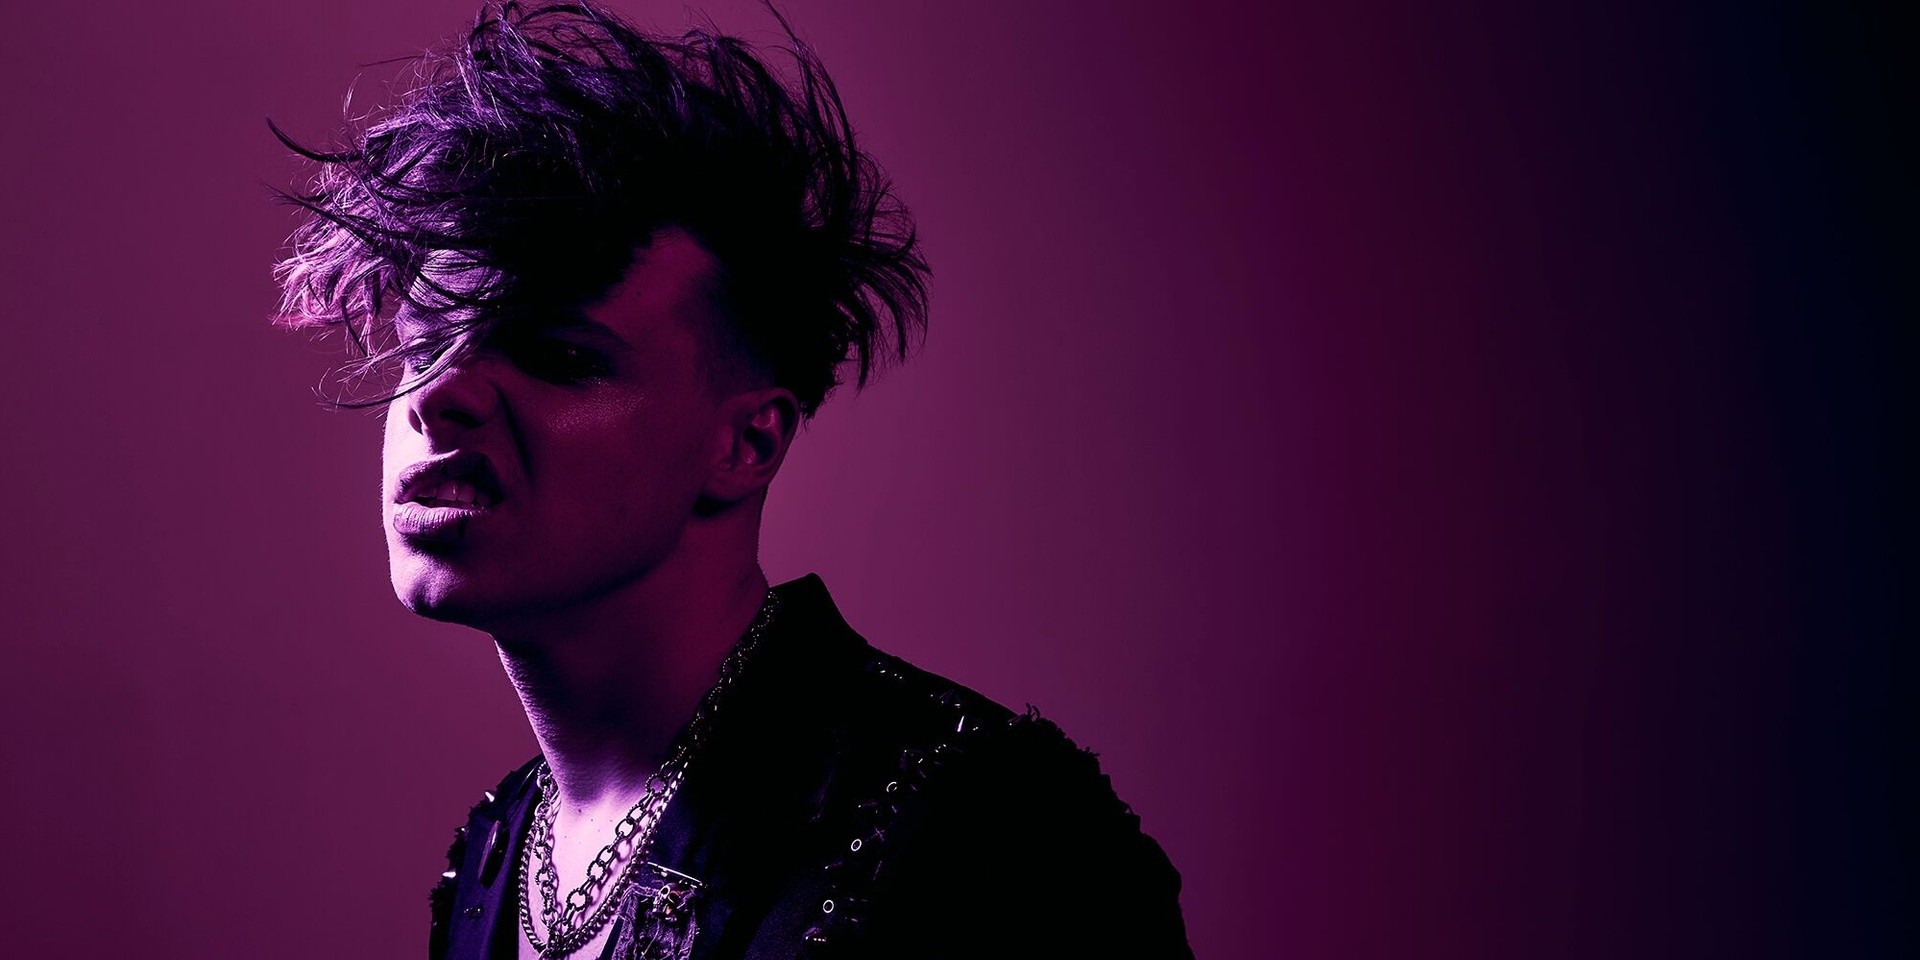 YUNGBLUD will perform in Singapore in March 2020